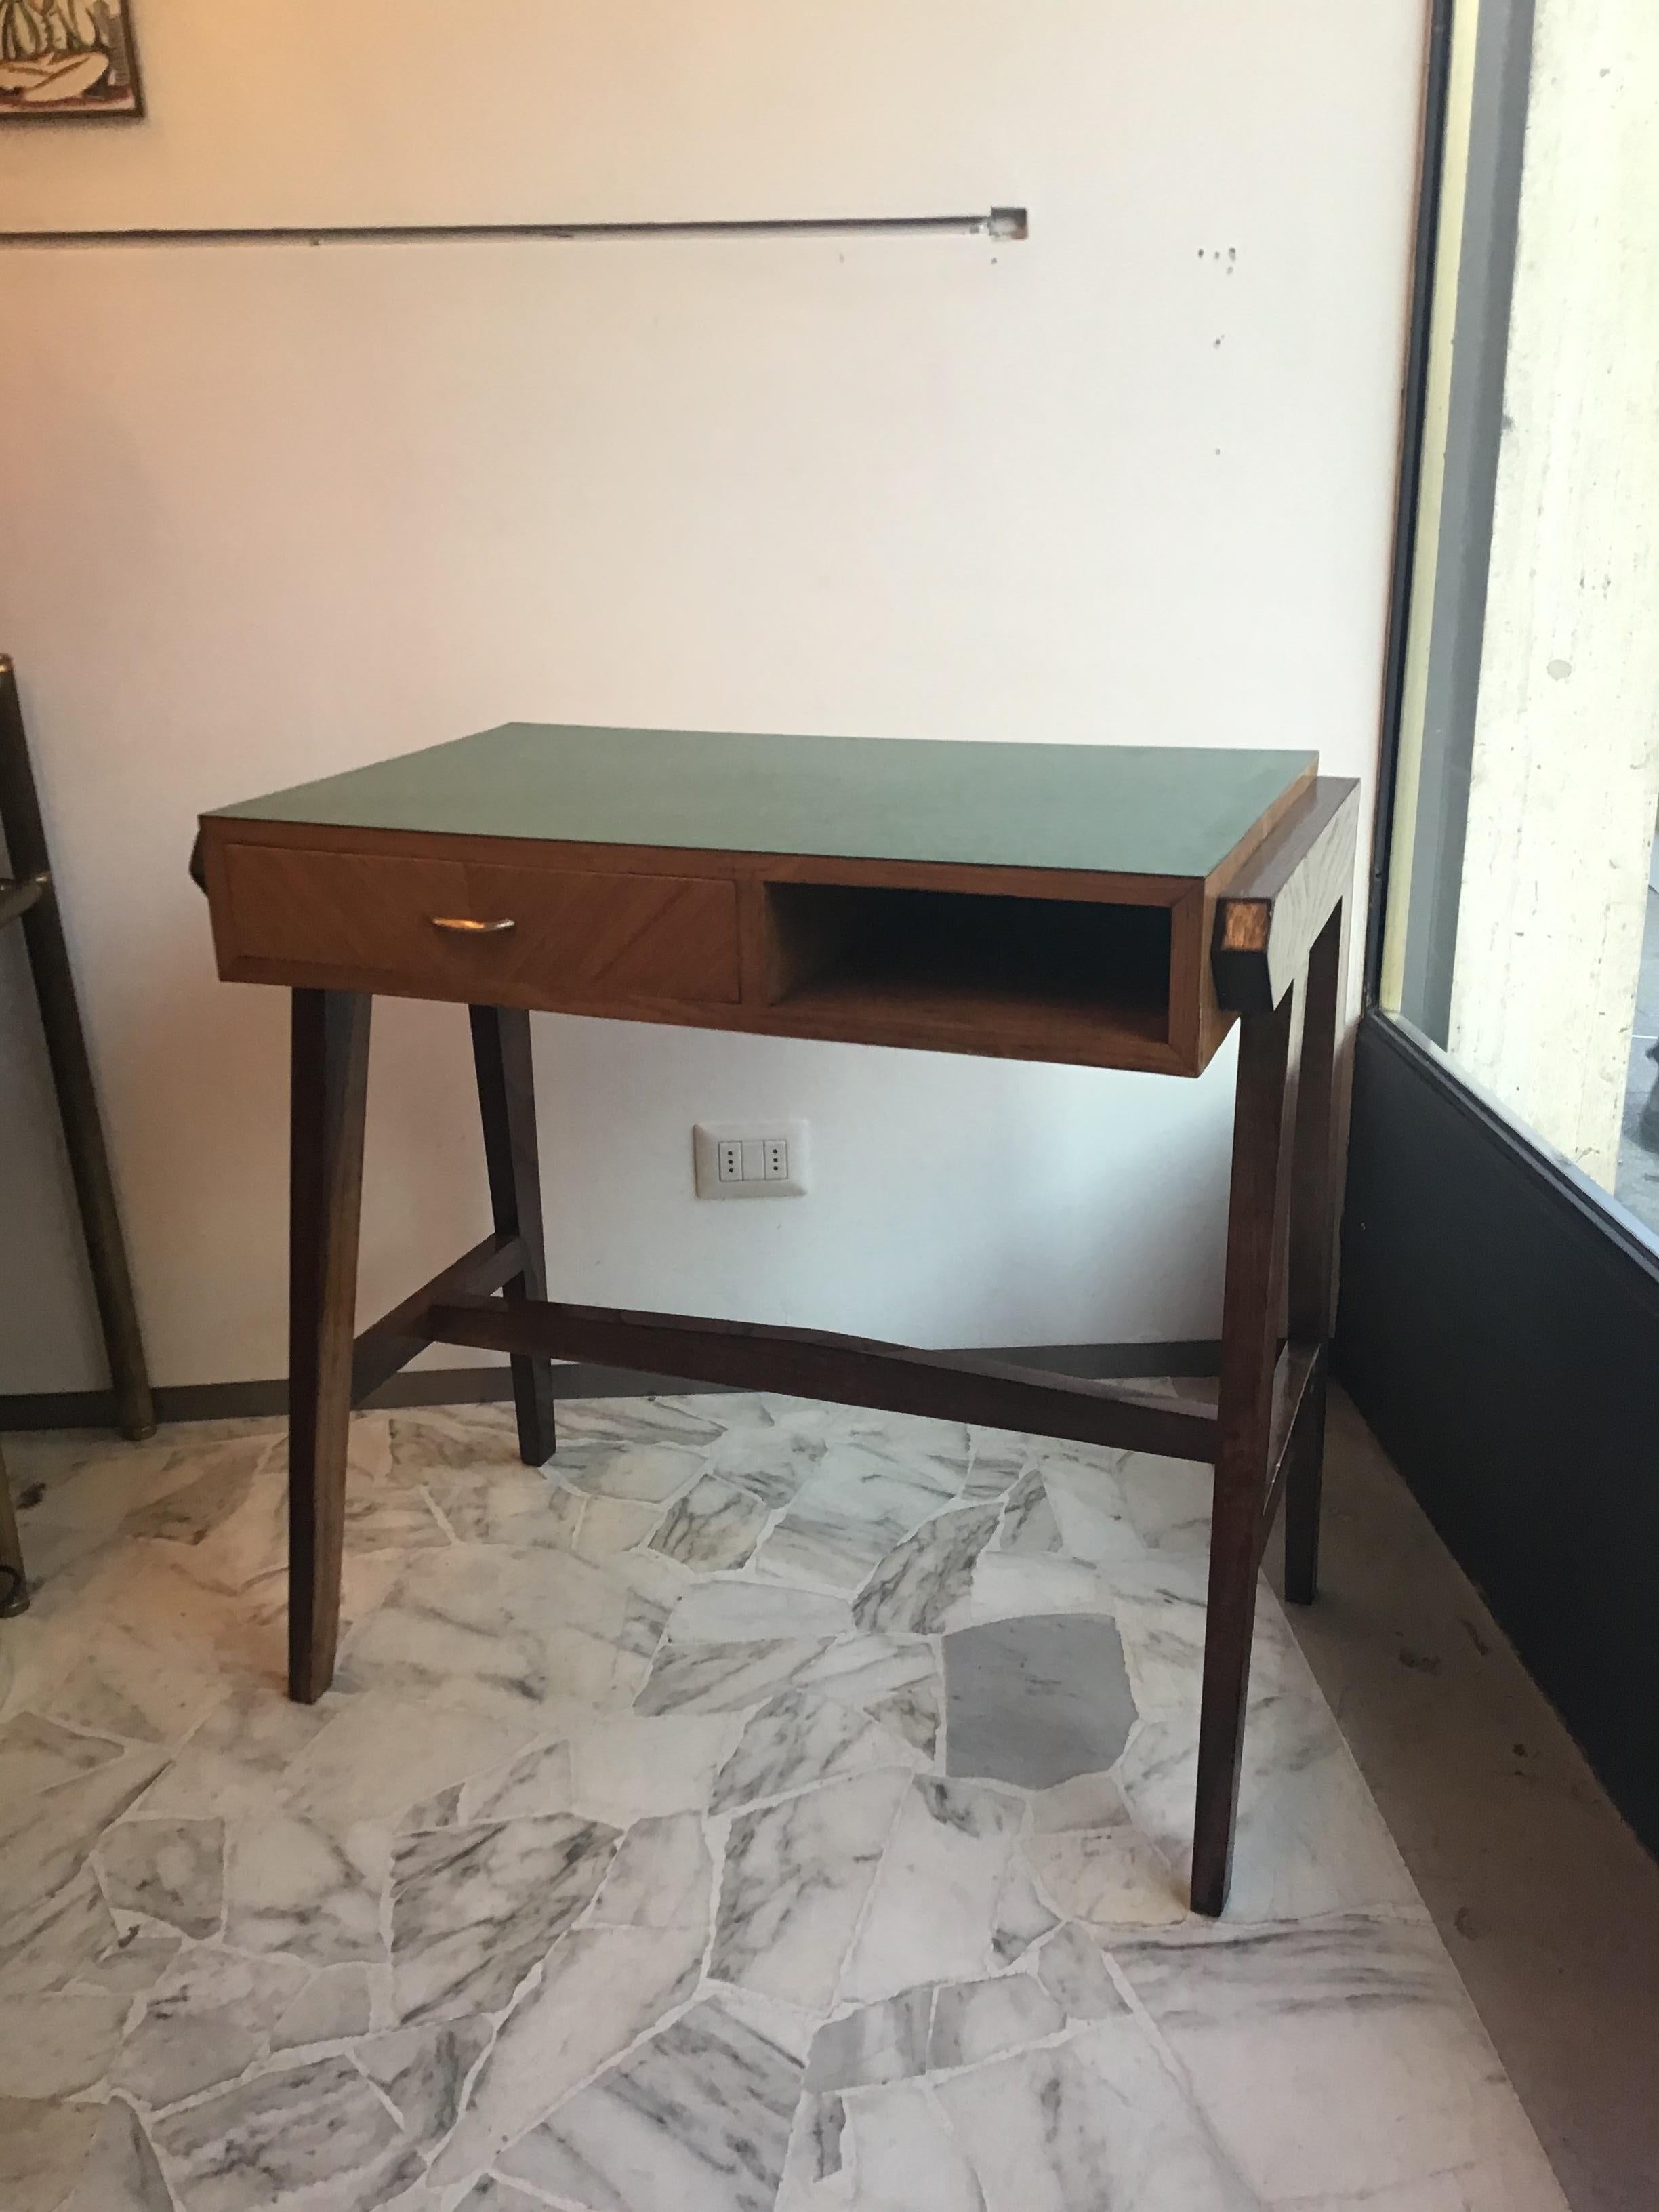 Other Gio Ponti “Stile” Desk Wood Brass, 1950, Italy For Sale